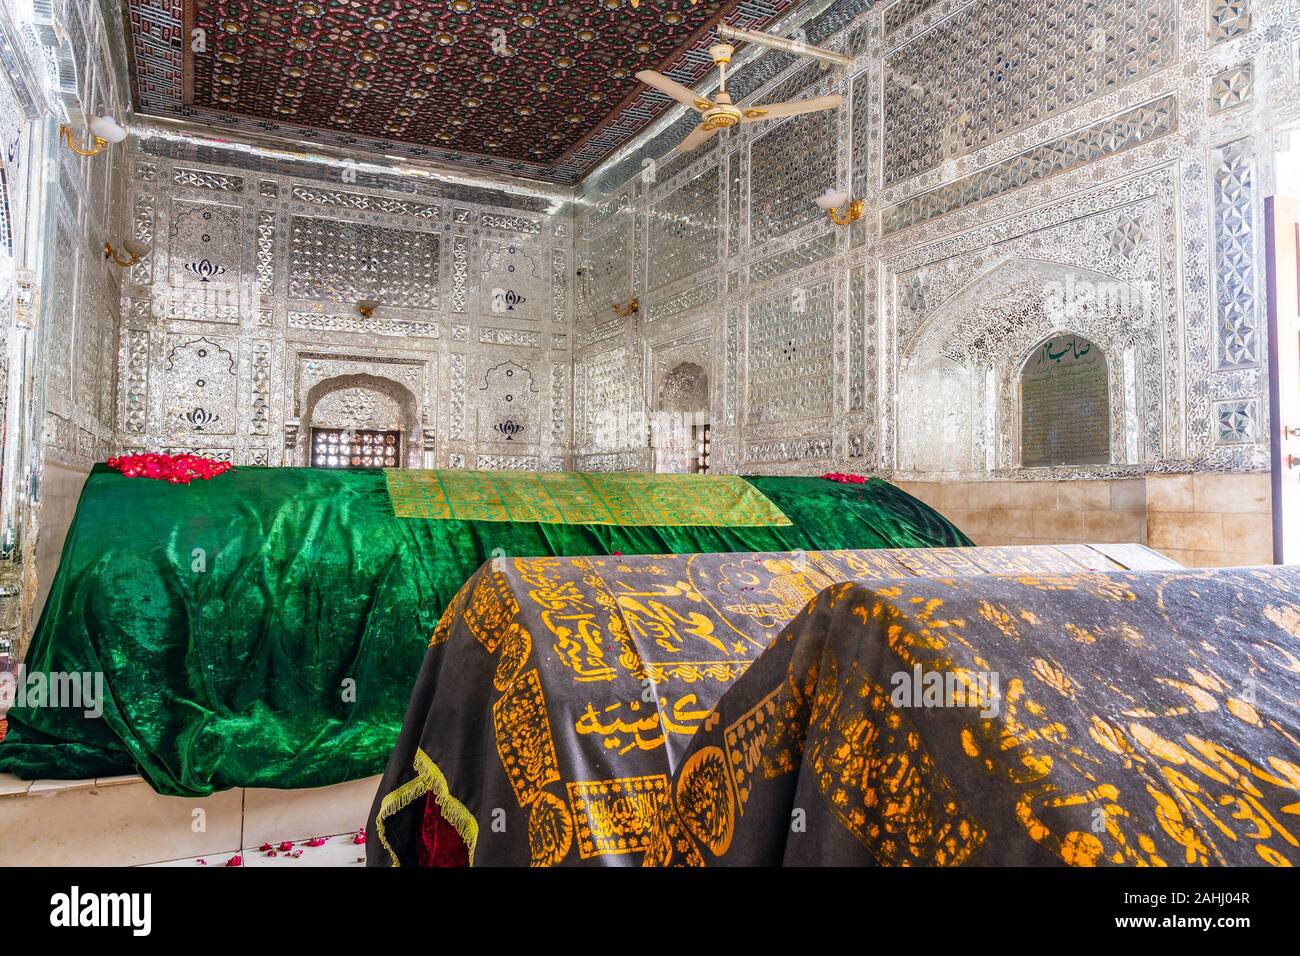 Multan Darbar Hazrat Yousaf Shah Gardez Tomb Picturesque Interior View on a Sunny Blue Sky Day Stock Photo